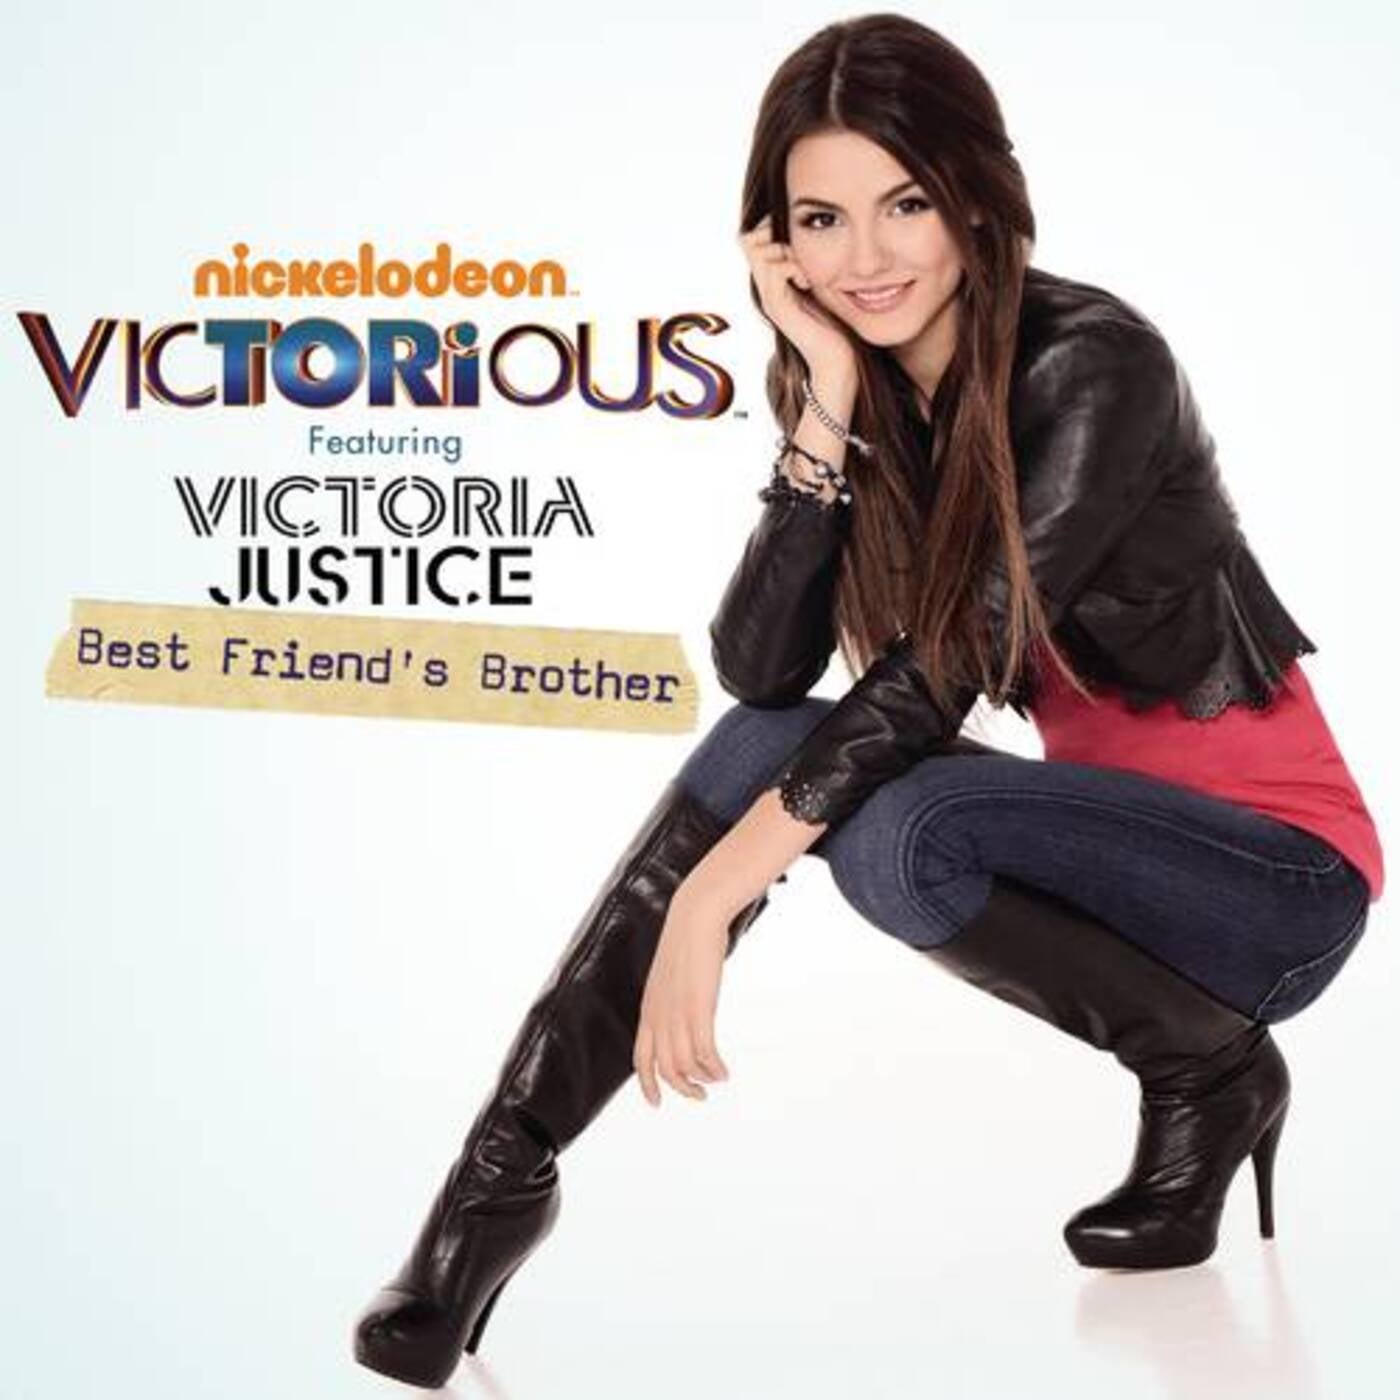 Best Friend's Brother by Victorious Cast and Victoria Justice on